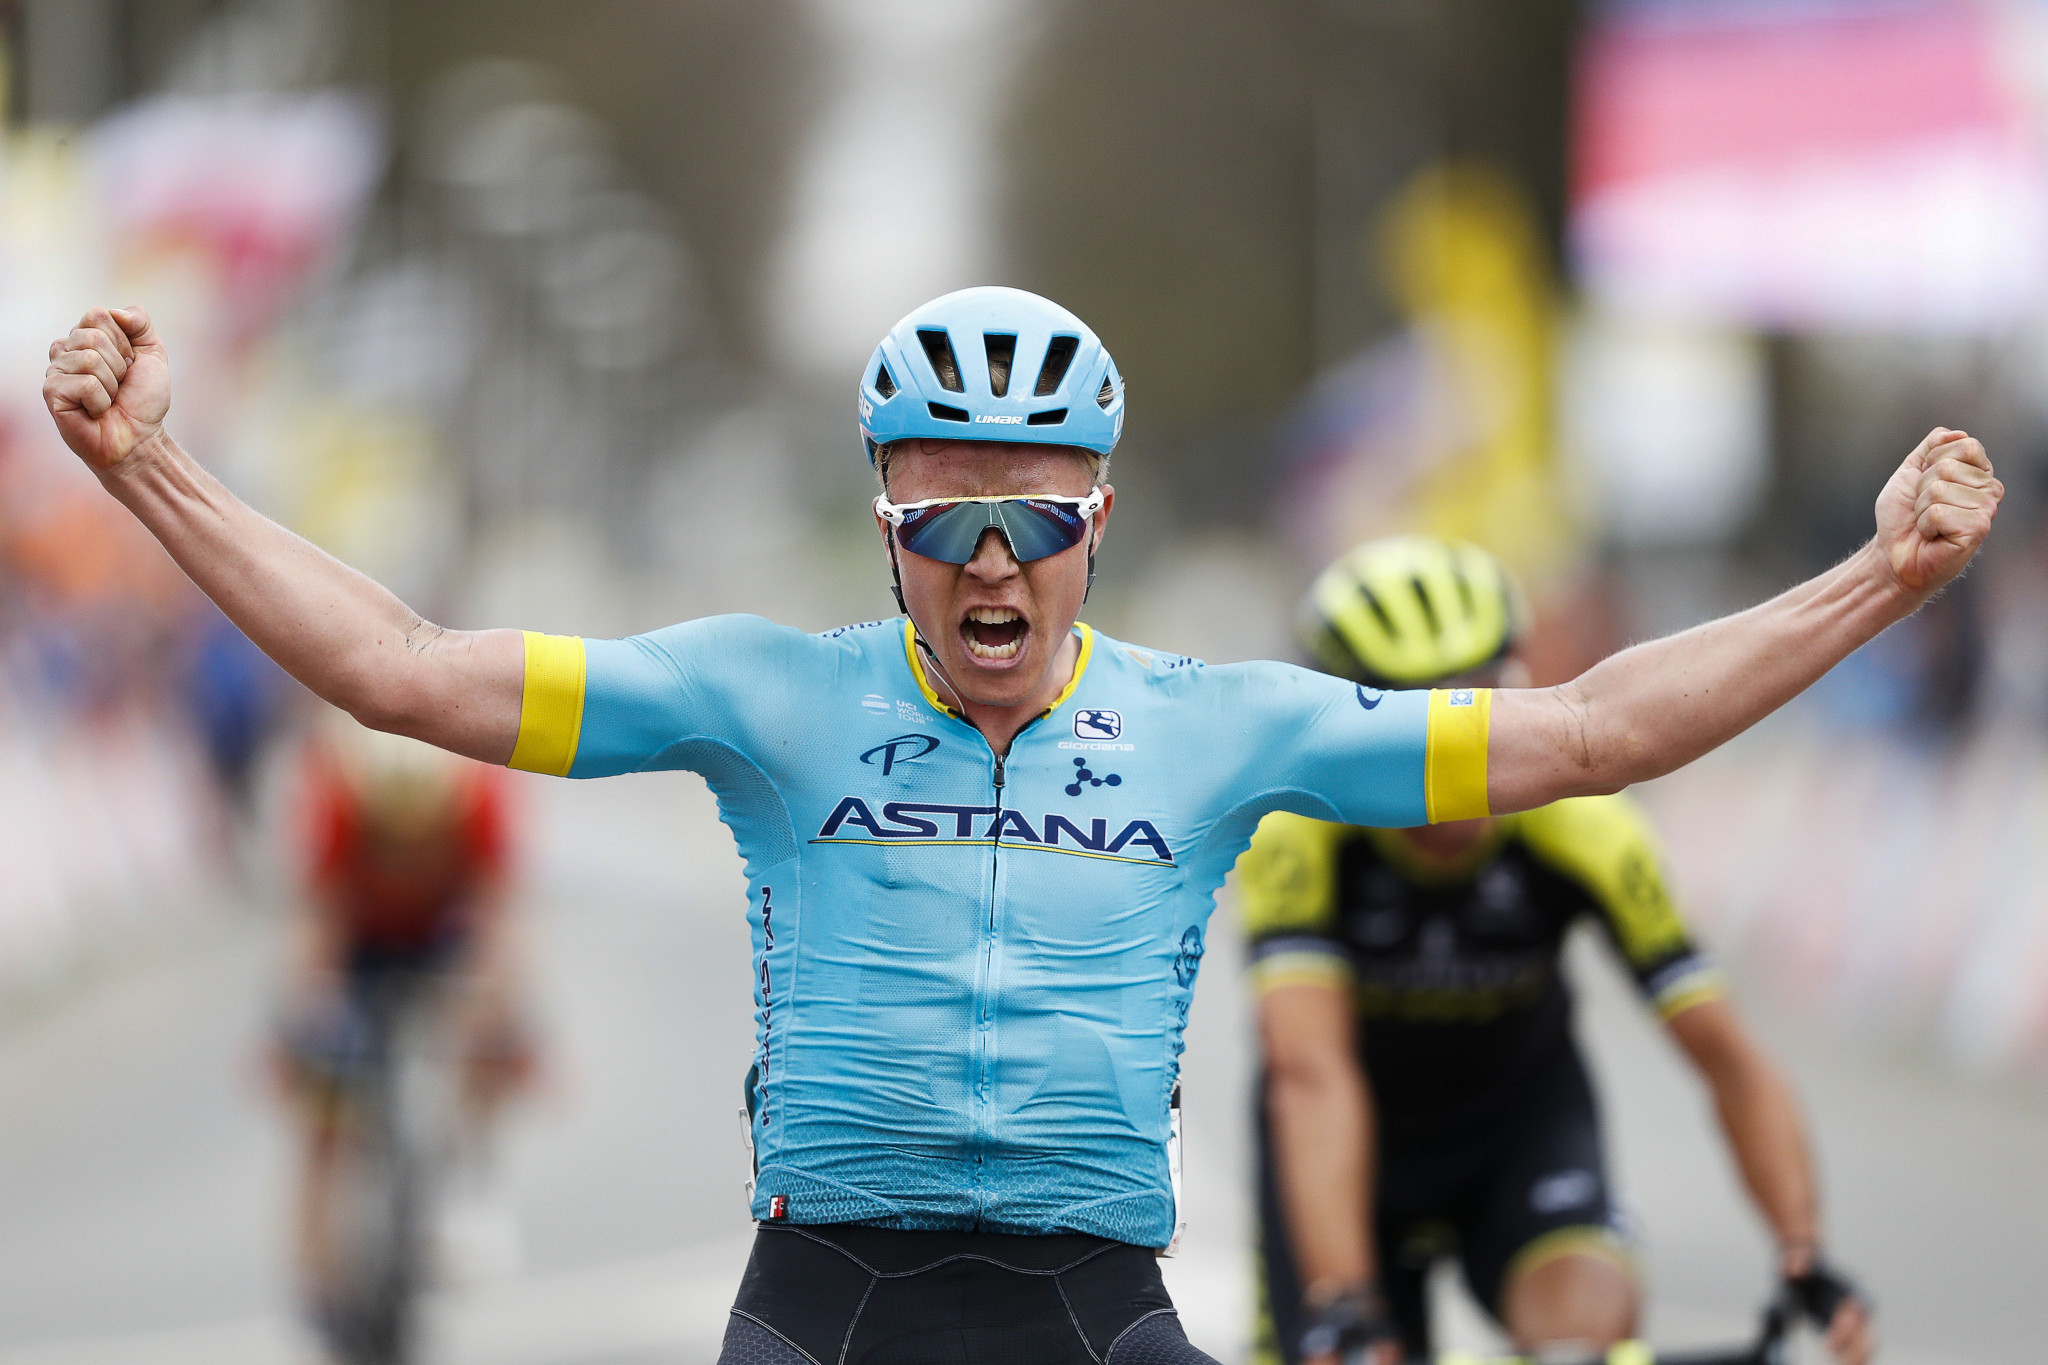  Valgren sprints to highlight victory in Amstel Gold Race